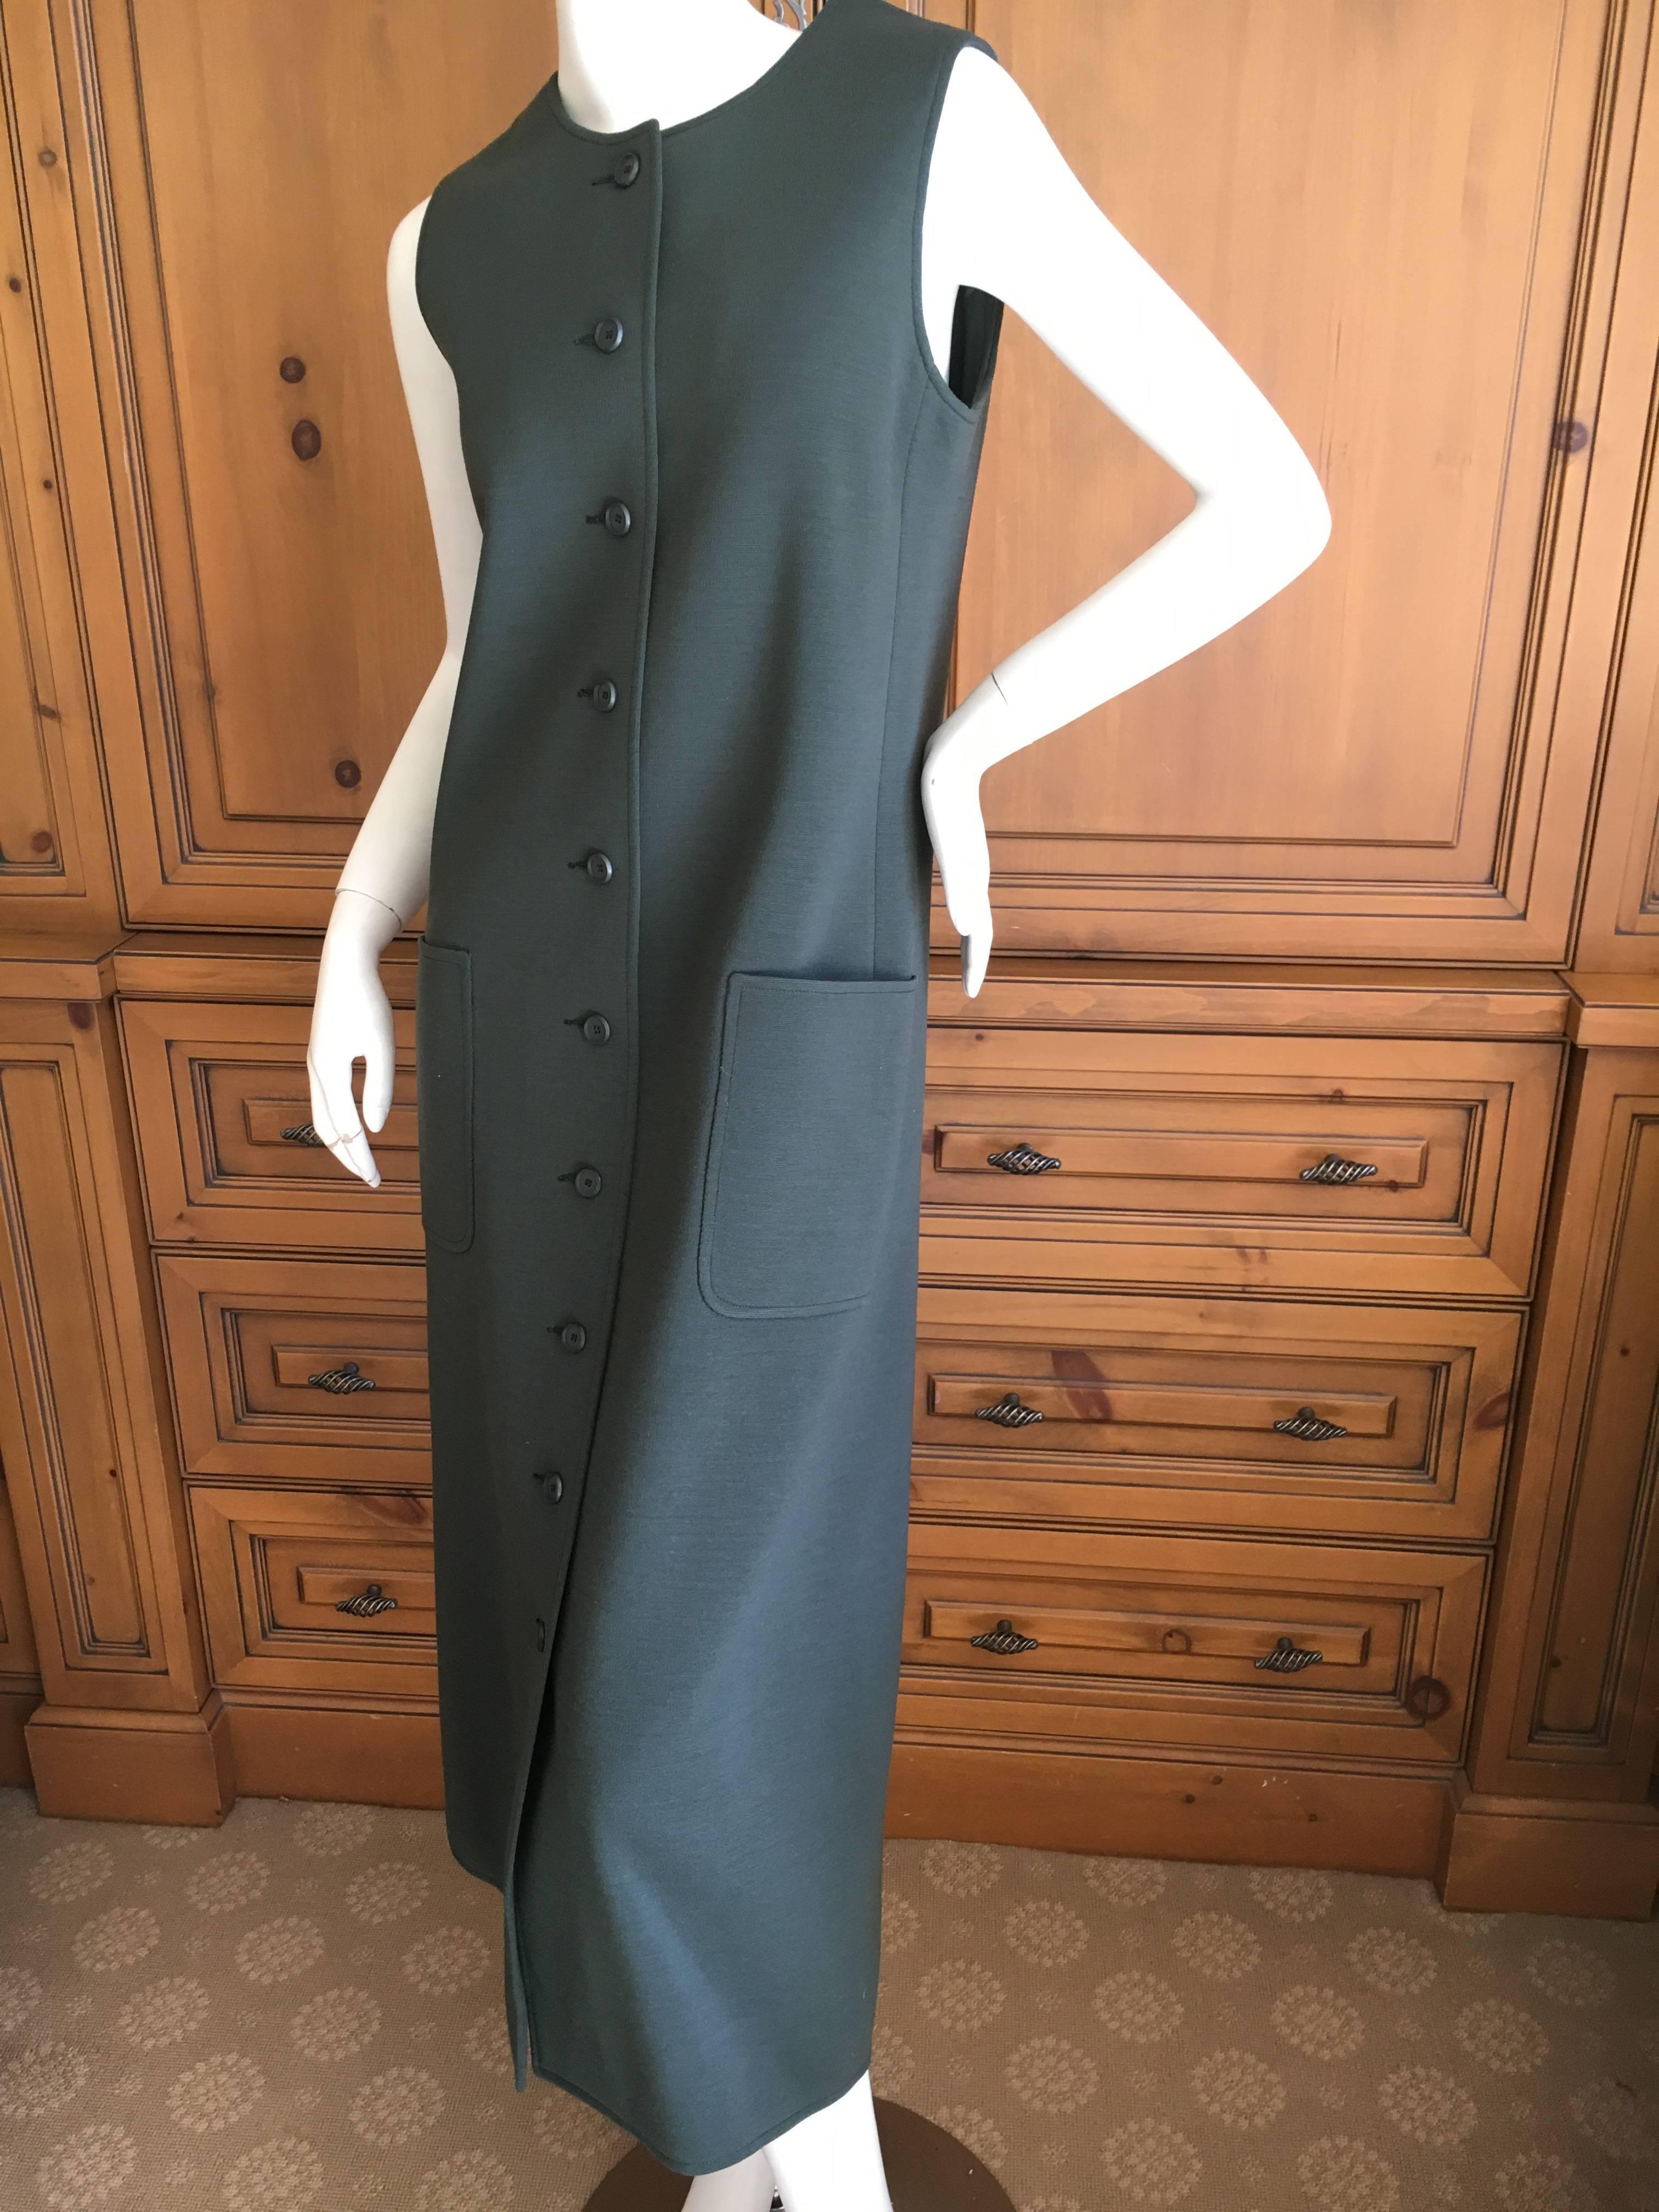 Yves Saint Laurent Early 1960's Olive Green Sleeveless Shift Dress.
Wool , lined in silk.
Size 40
Bust 36